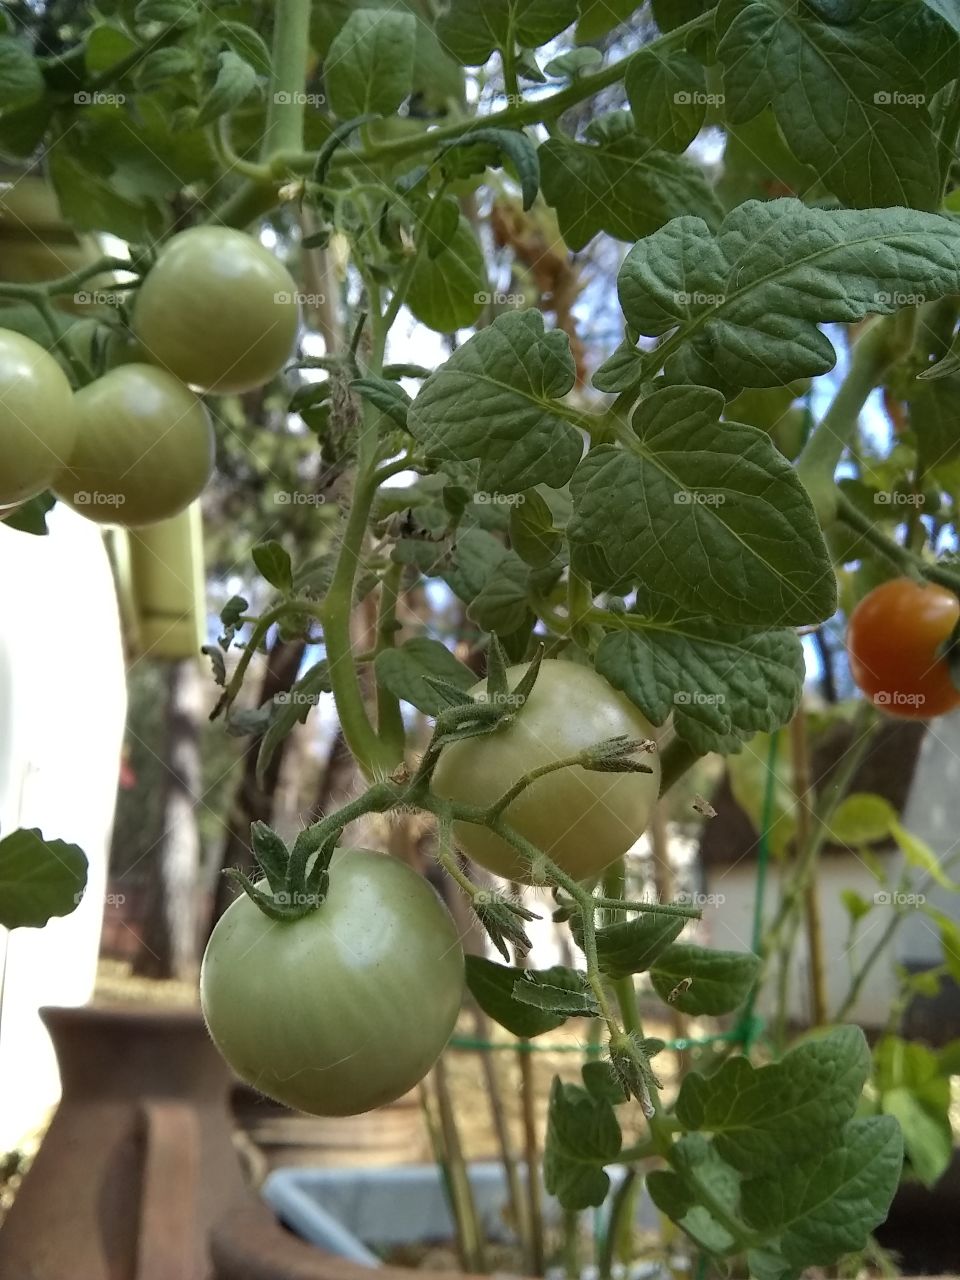 Tomato's growing on the vine